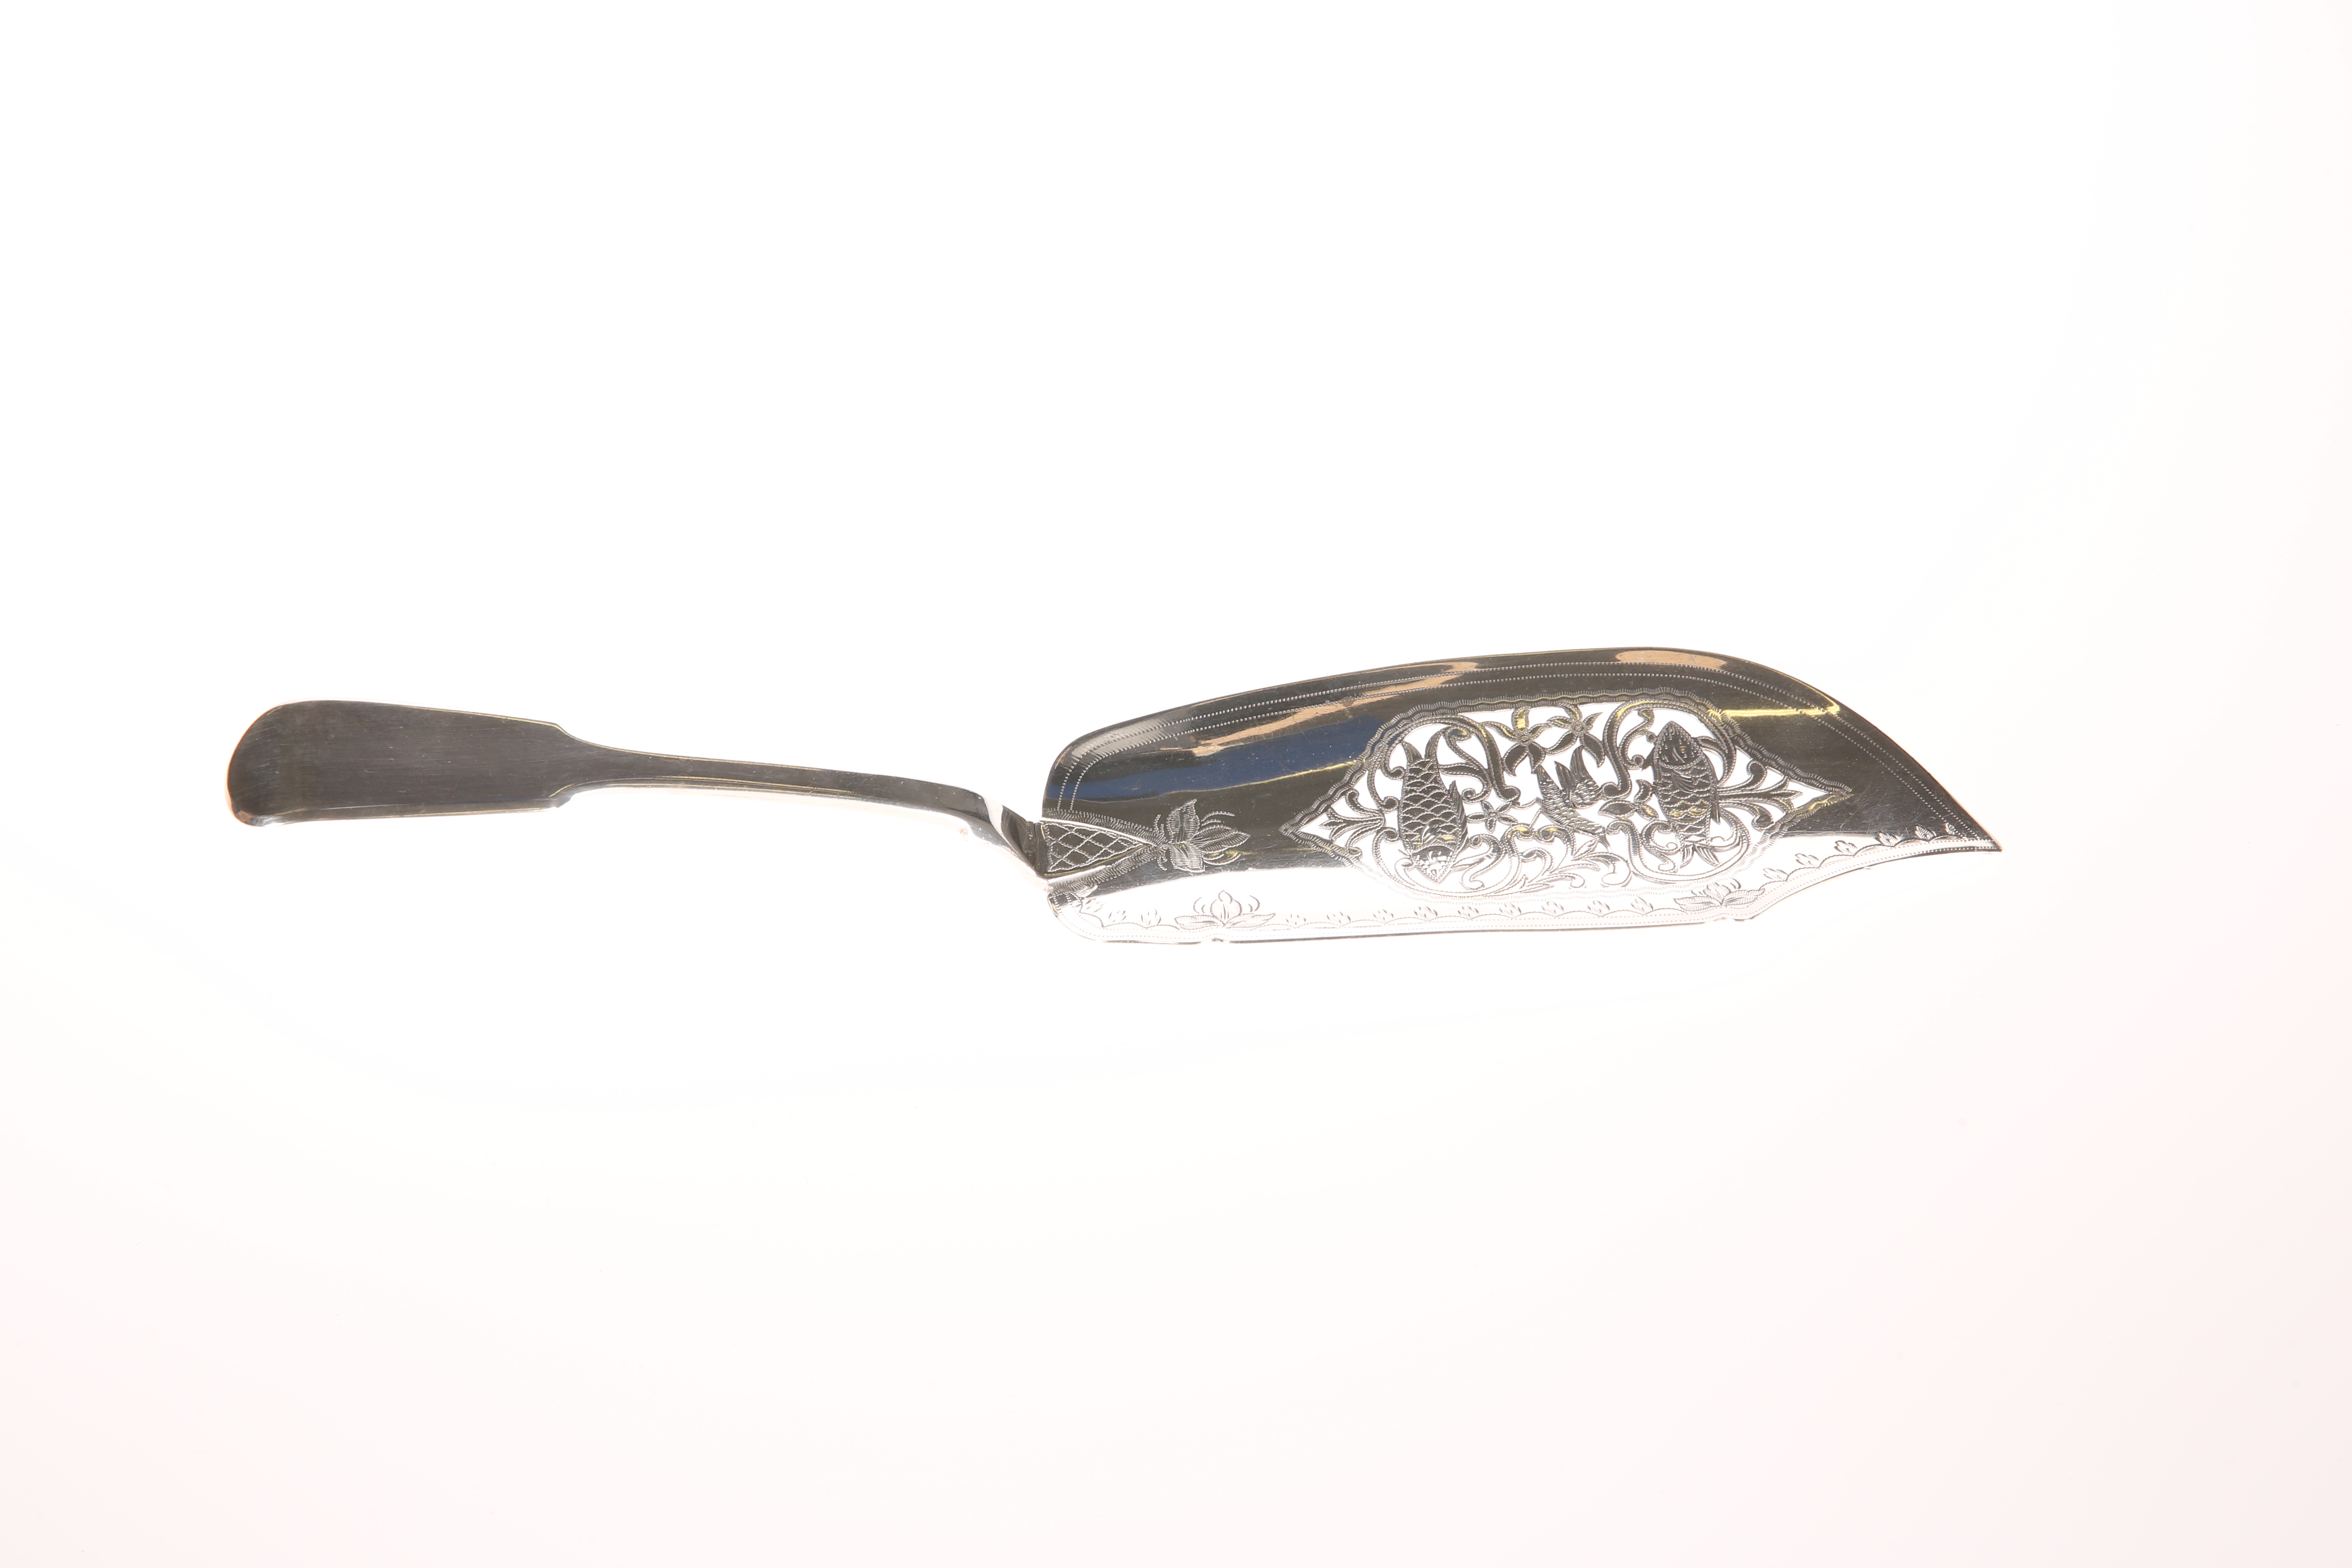 A VICTORIAN SILVER FISH-SLICE, SAMUEL HAYNE AND DUDLEY CATER, LONDON, 1846